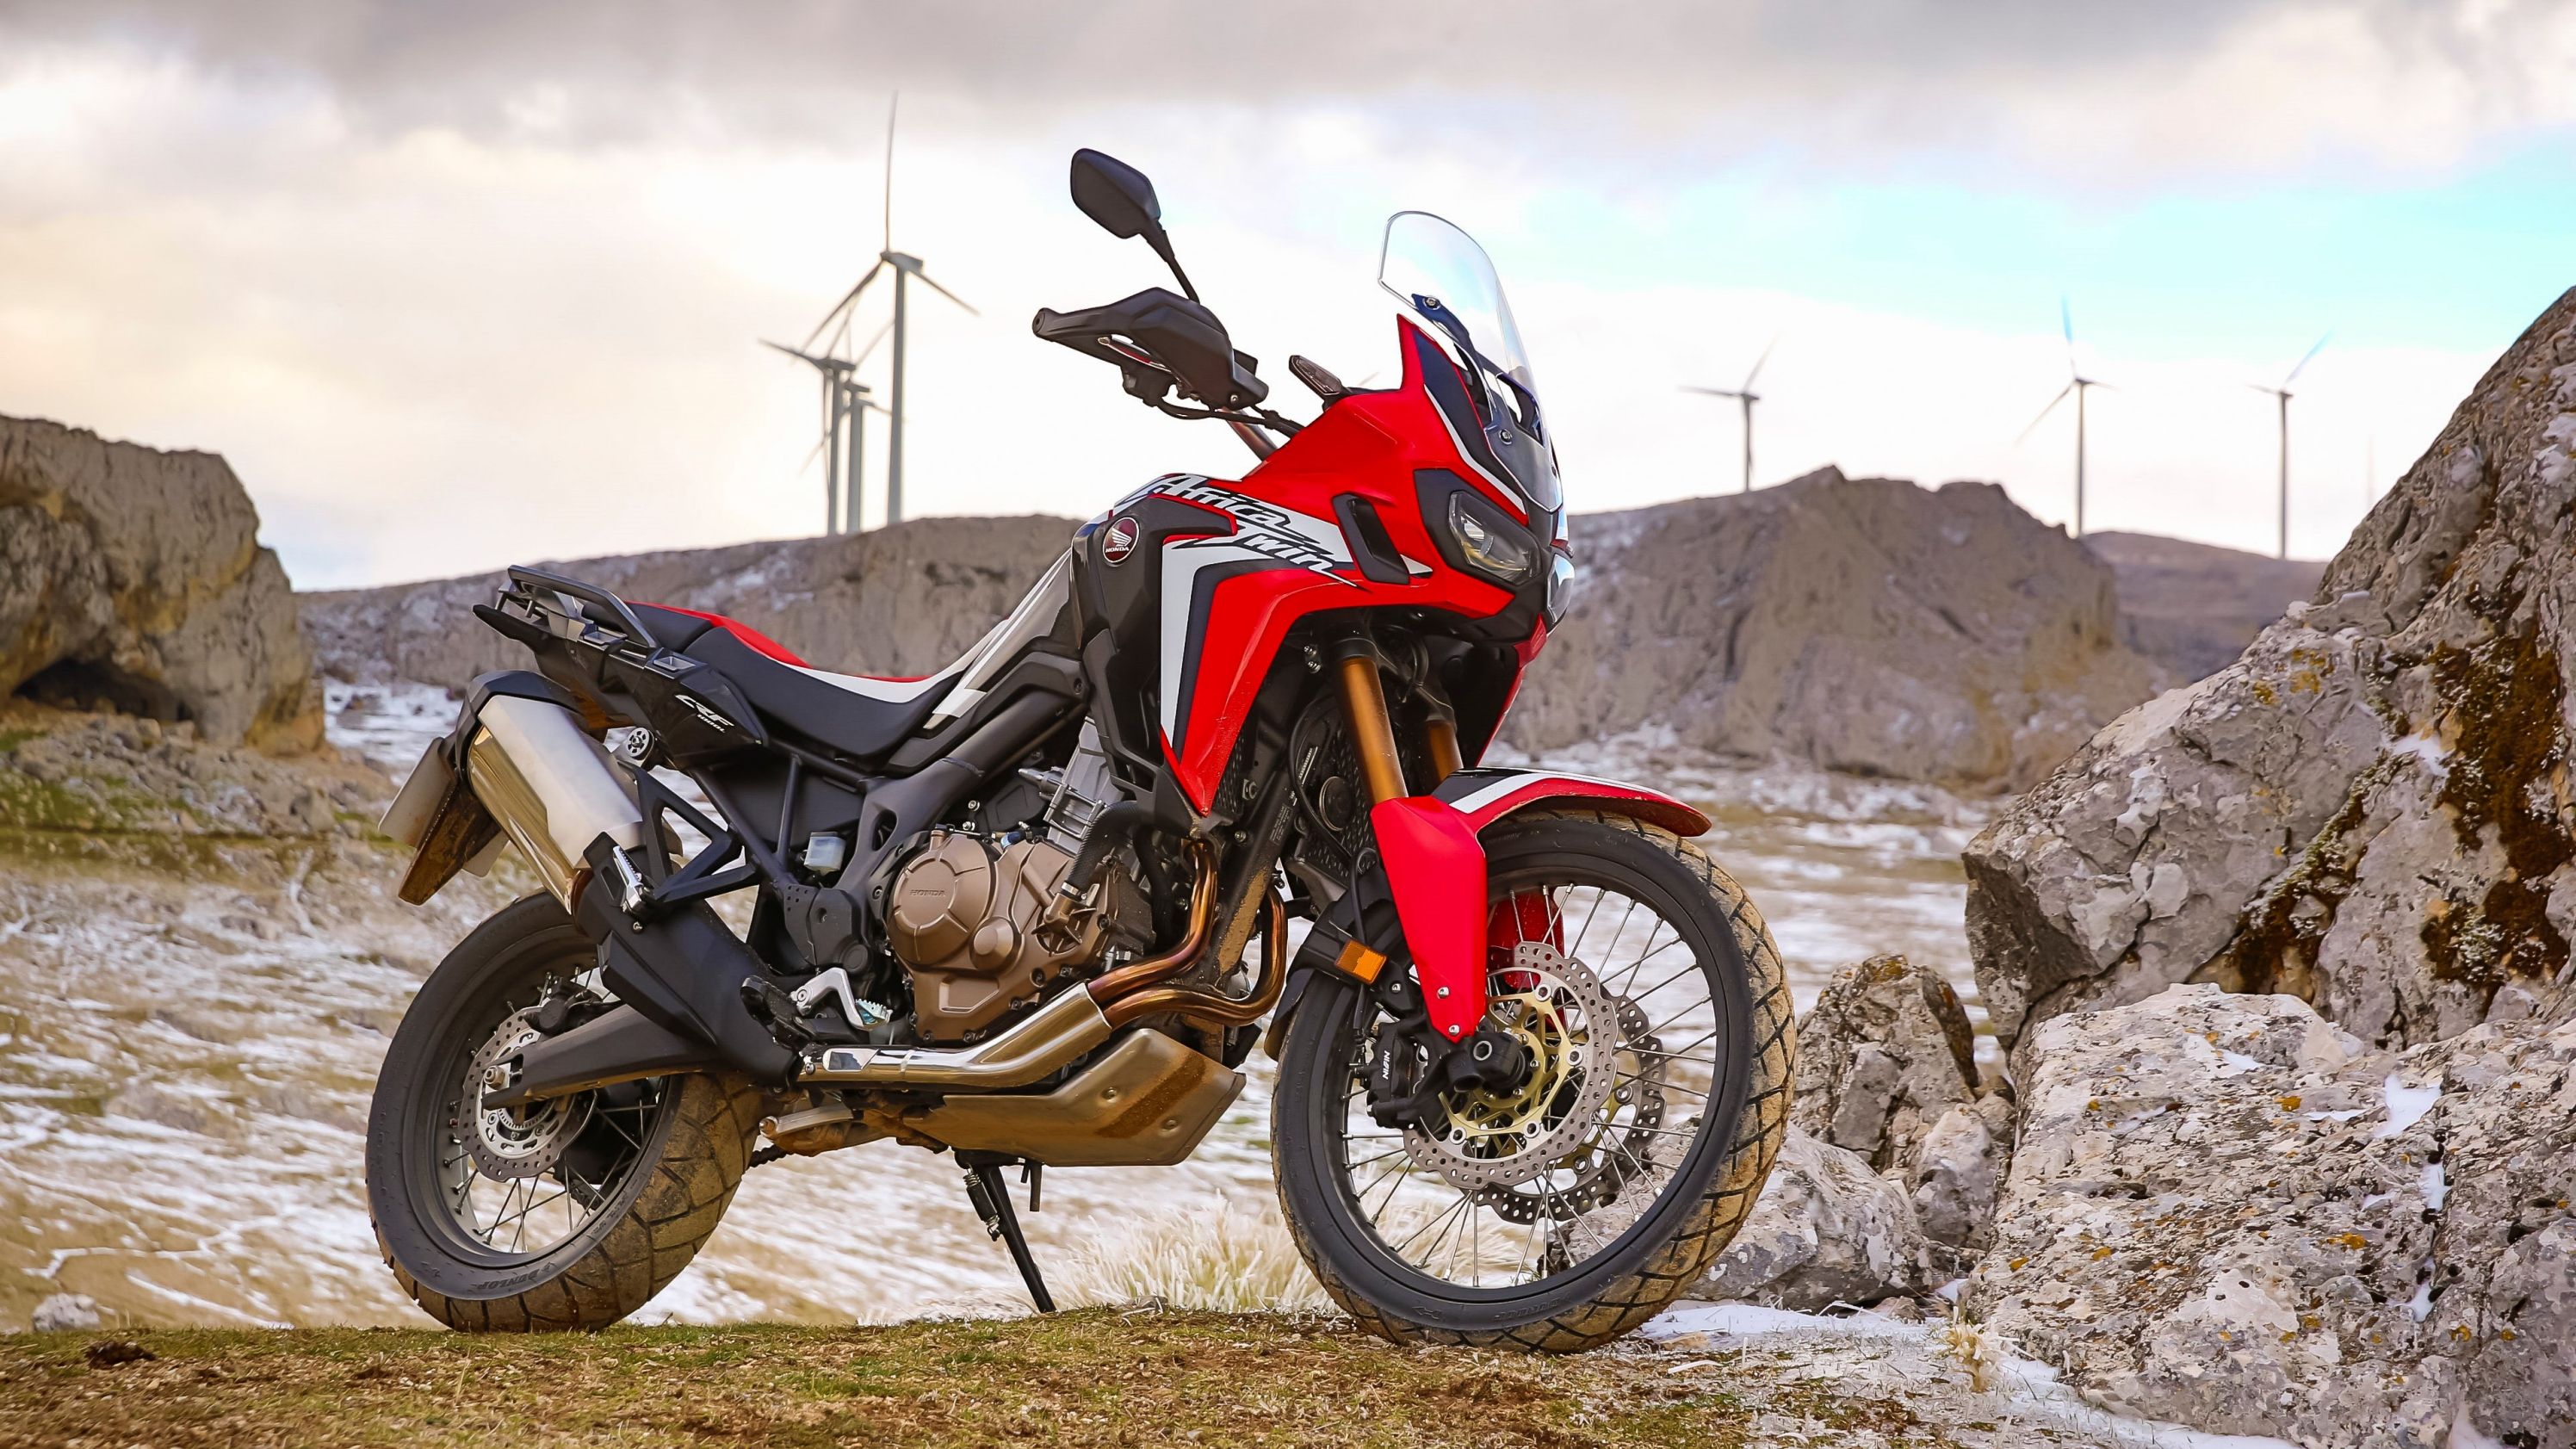 2019 Honda Africa Twin Picture, Photo, Wallpaper. Top